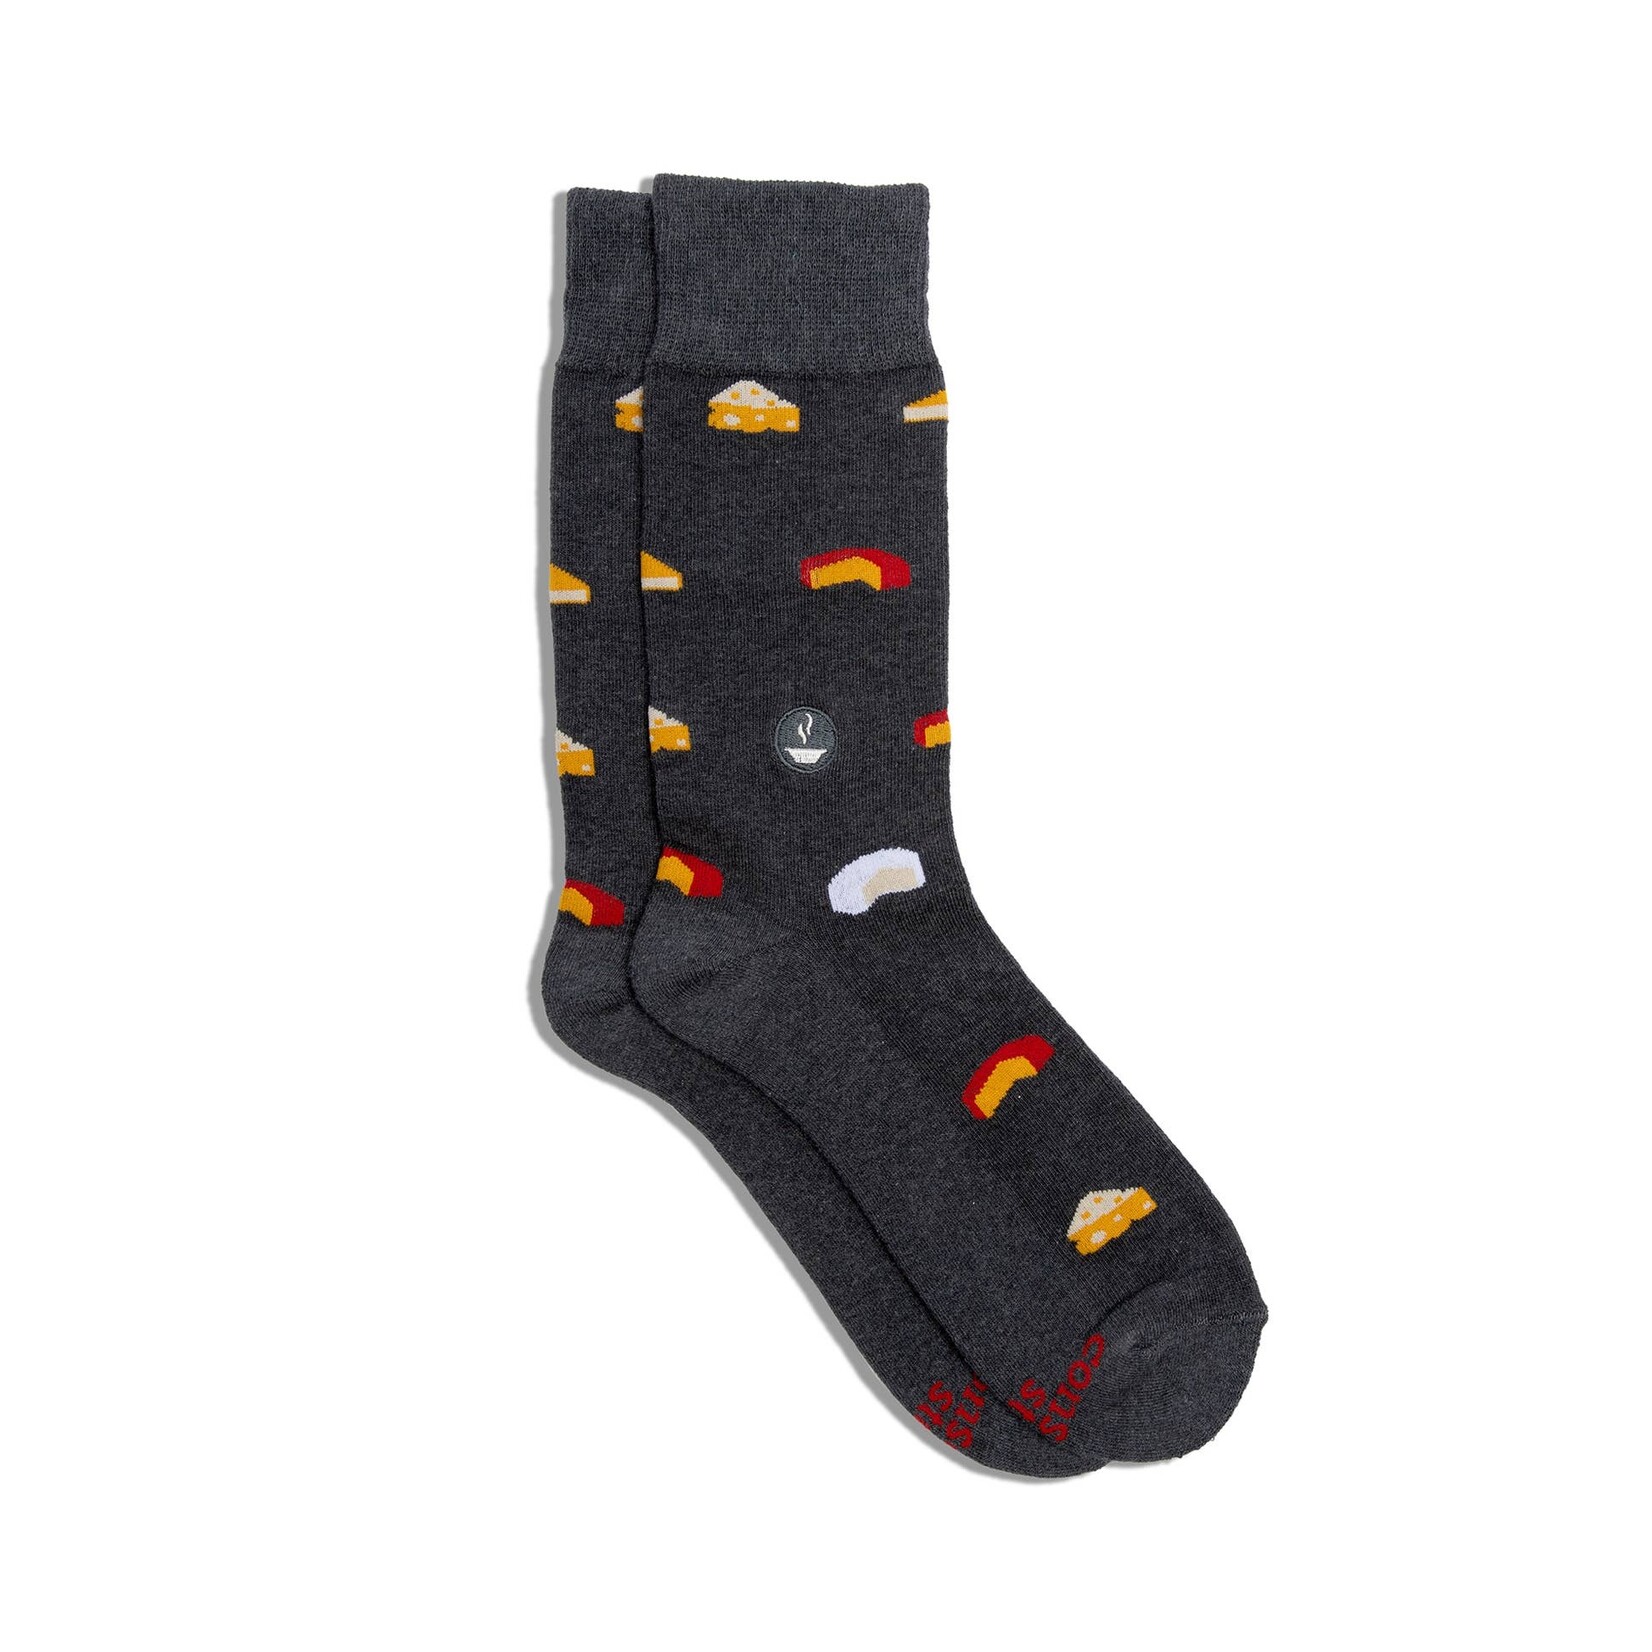 Conscious Step Socks that Provide Meals (Gray Cheese) MD